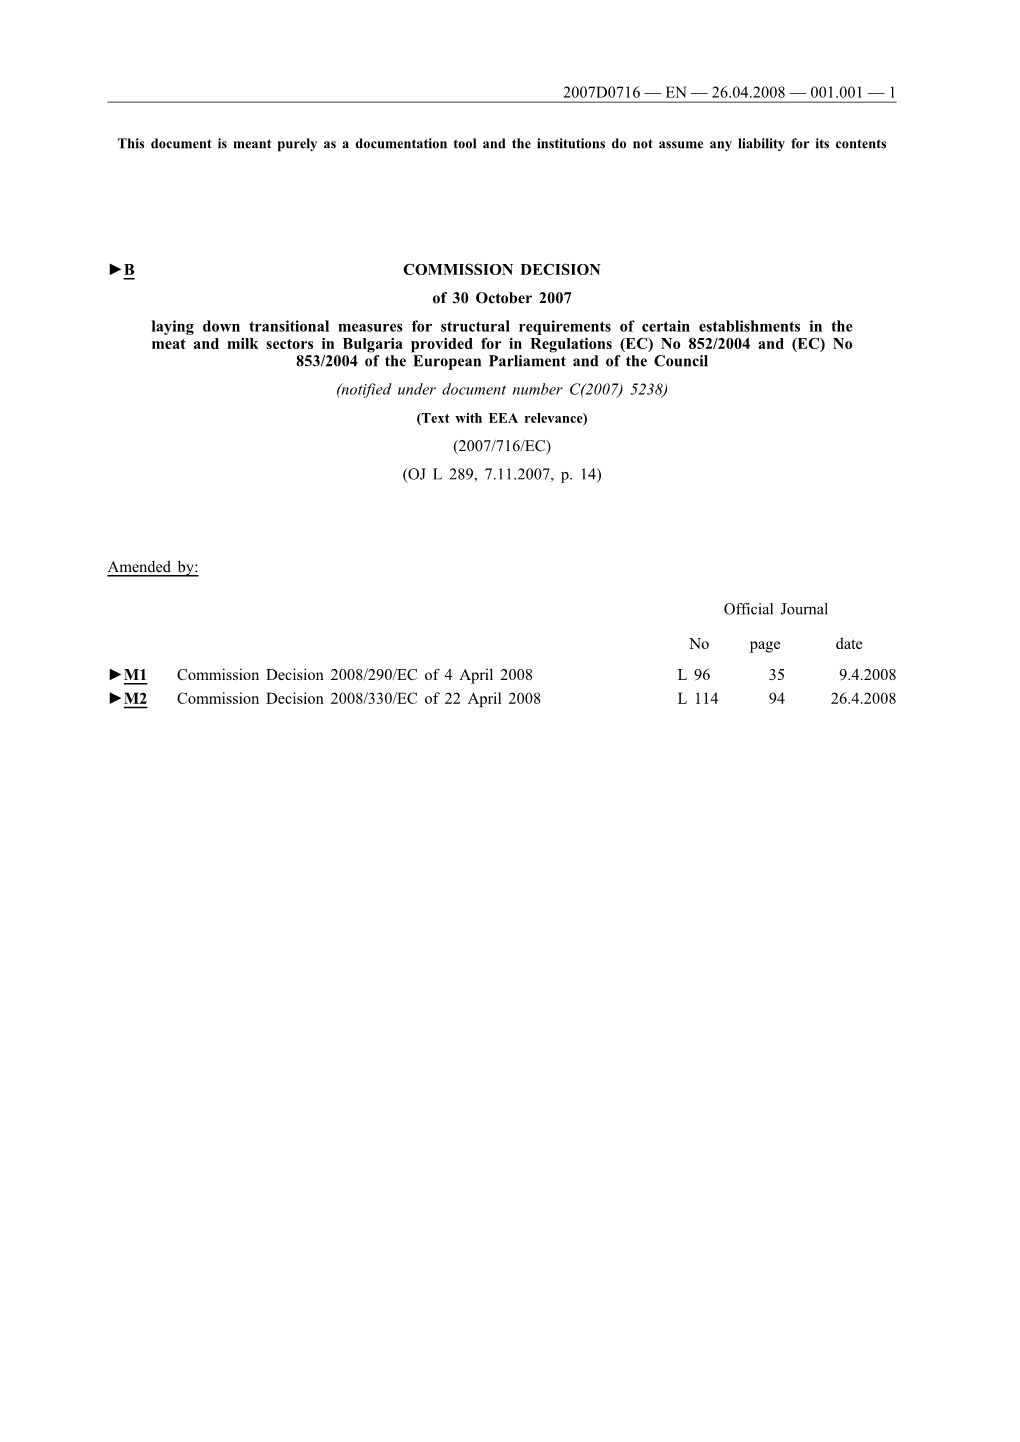 B COMMISSION DECISION of 30 October 2007